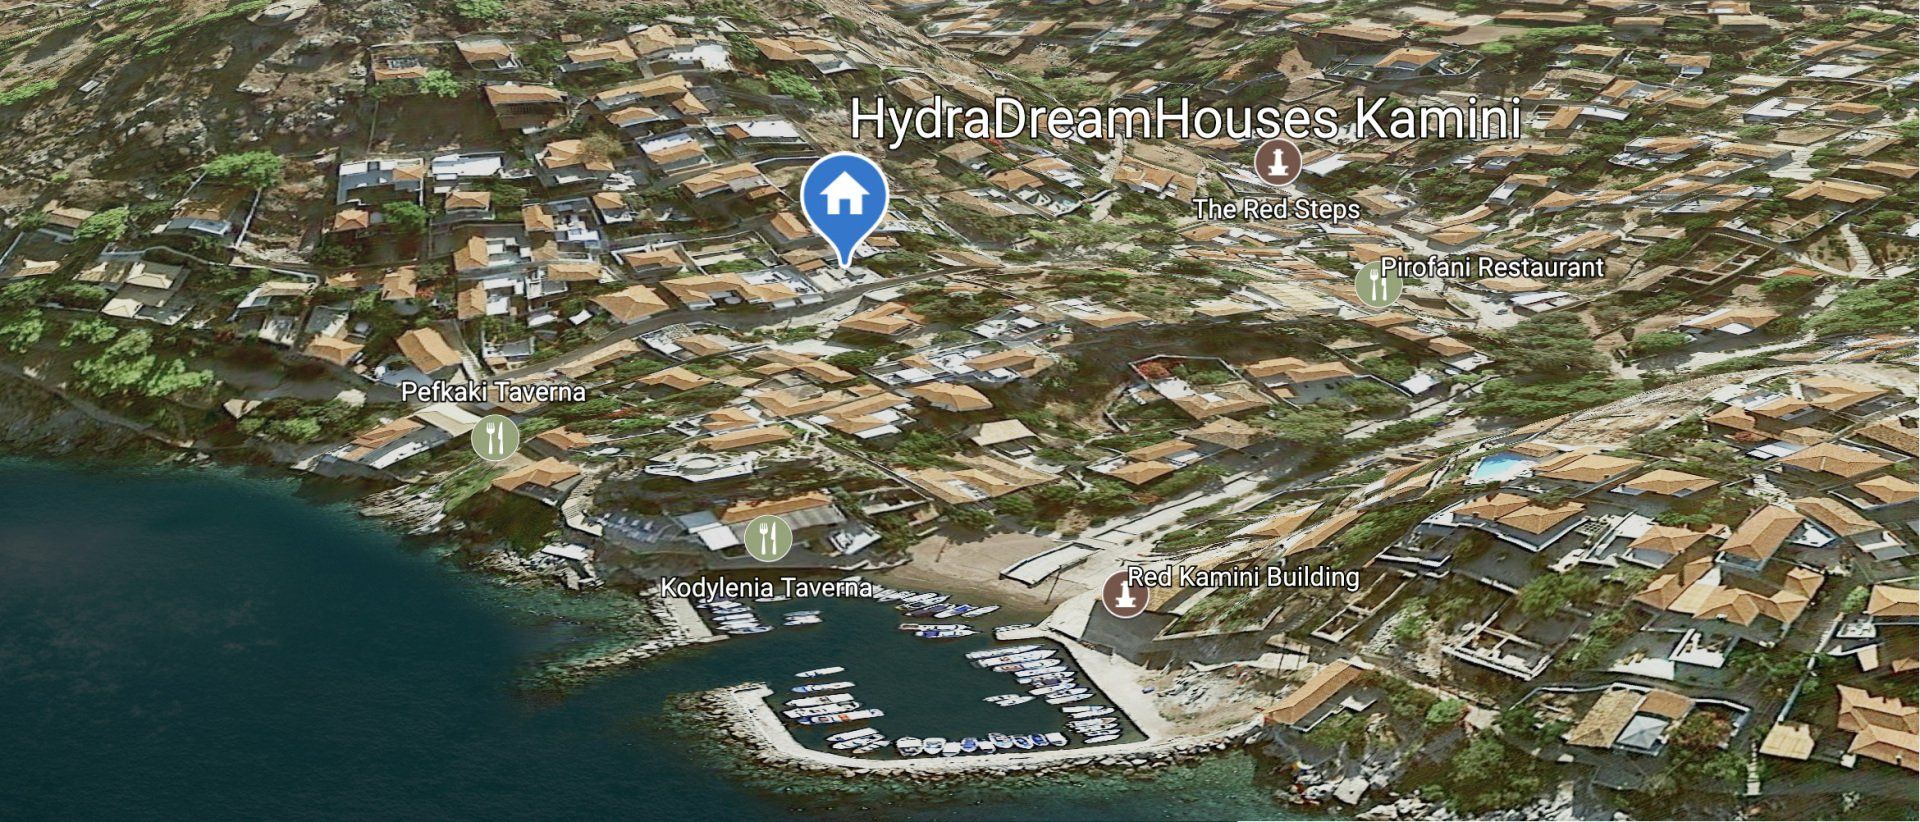 Location Map for HydraDreamHouses in Kamini on Hydra Island Greece